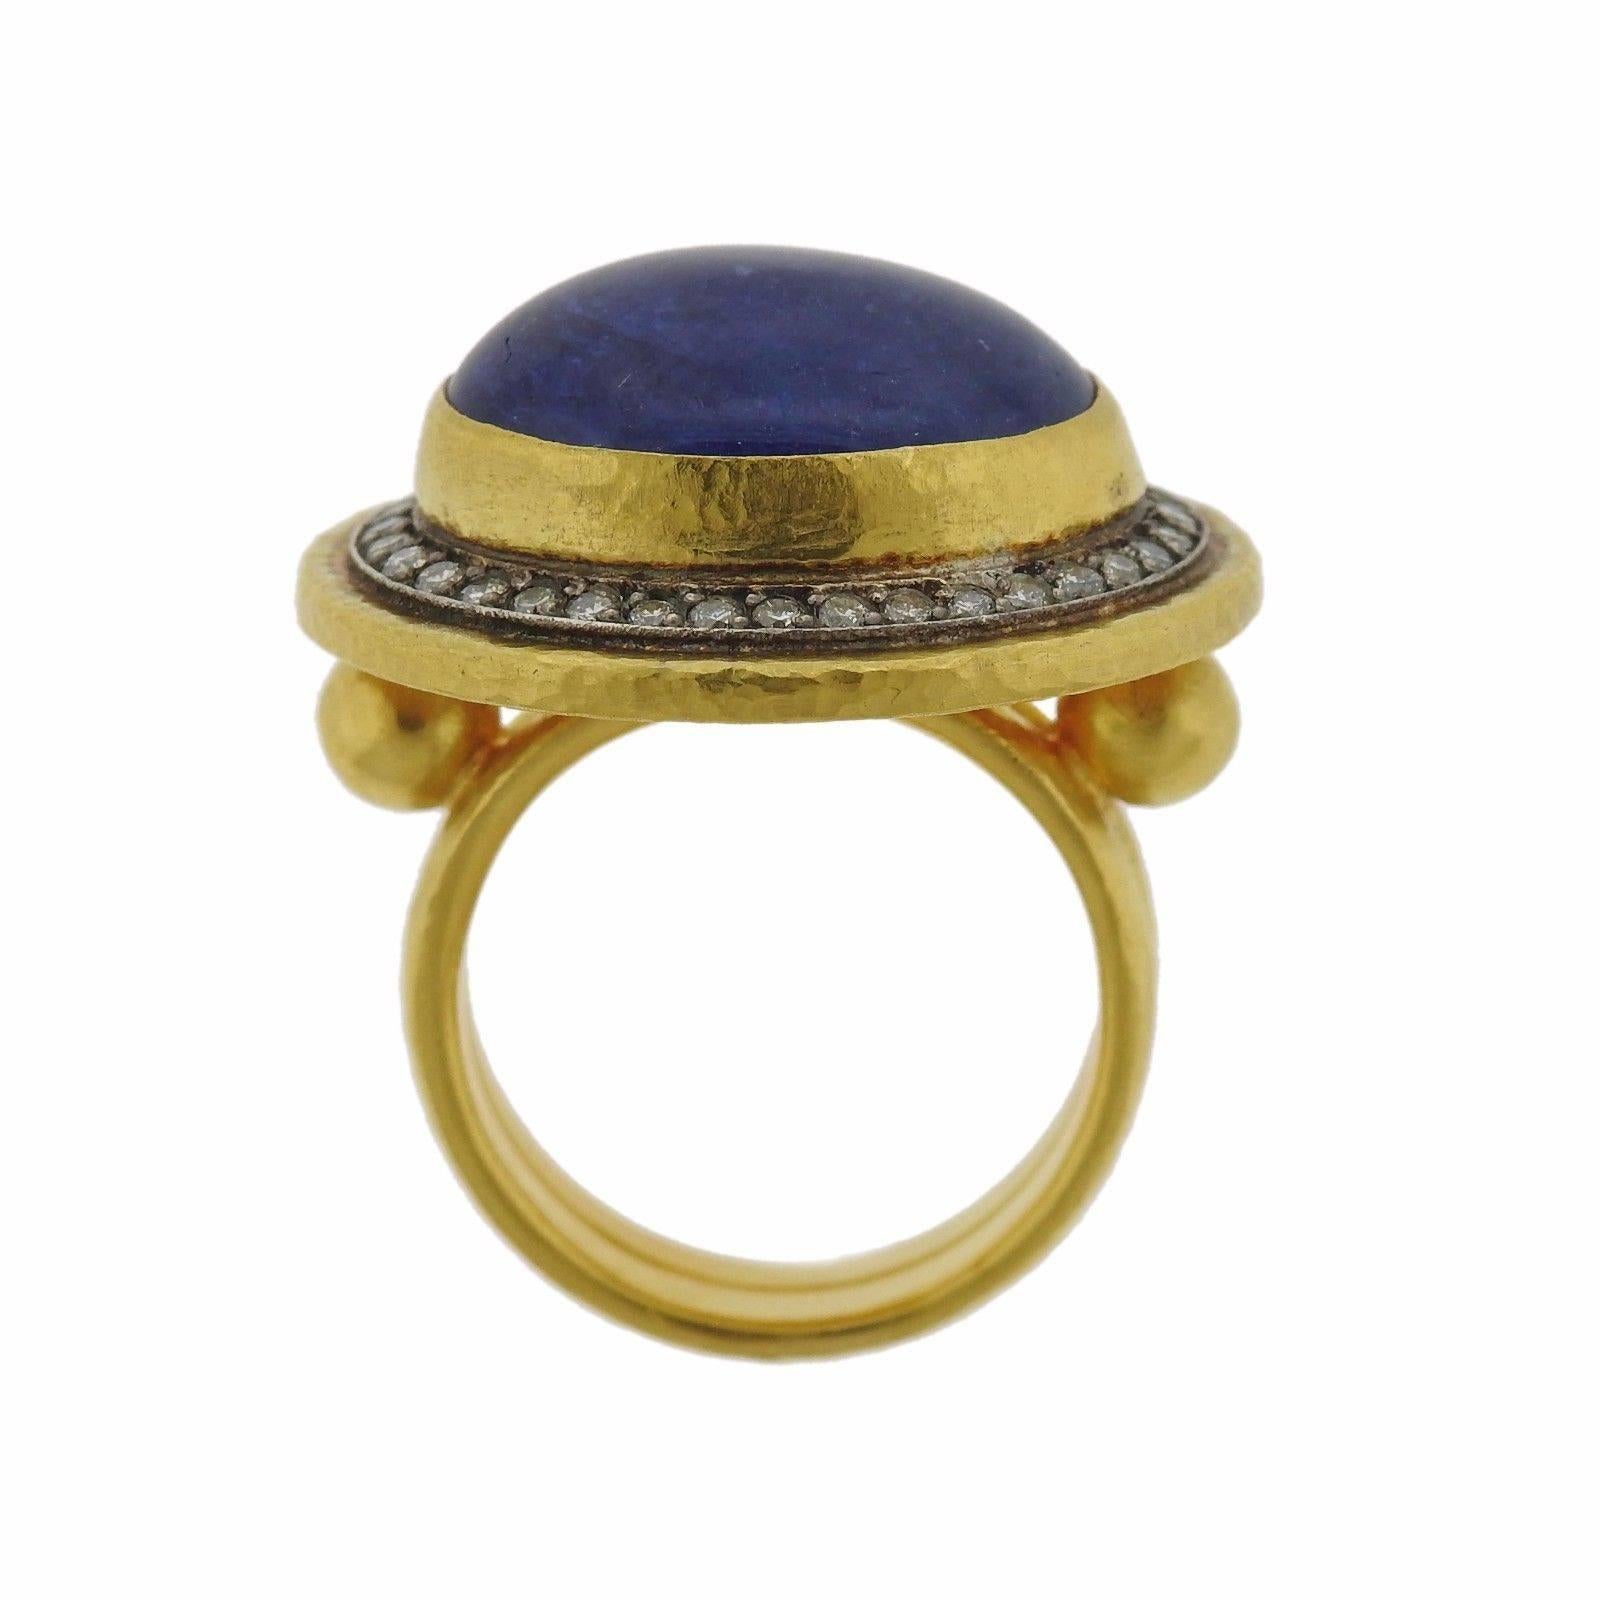 A 24k yellow gold ring set with a tanzanite cabochon (17.5mm x 13mm) and approximately 0.56ctw of H/VS diamonds.  The ring is a size 6 1/2, and the ring top measures 22mm x 25mm.  The weight of the piece Marked: Gurhan mark, RA03630, 0.990 H.